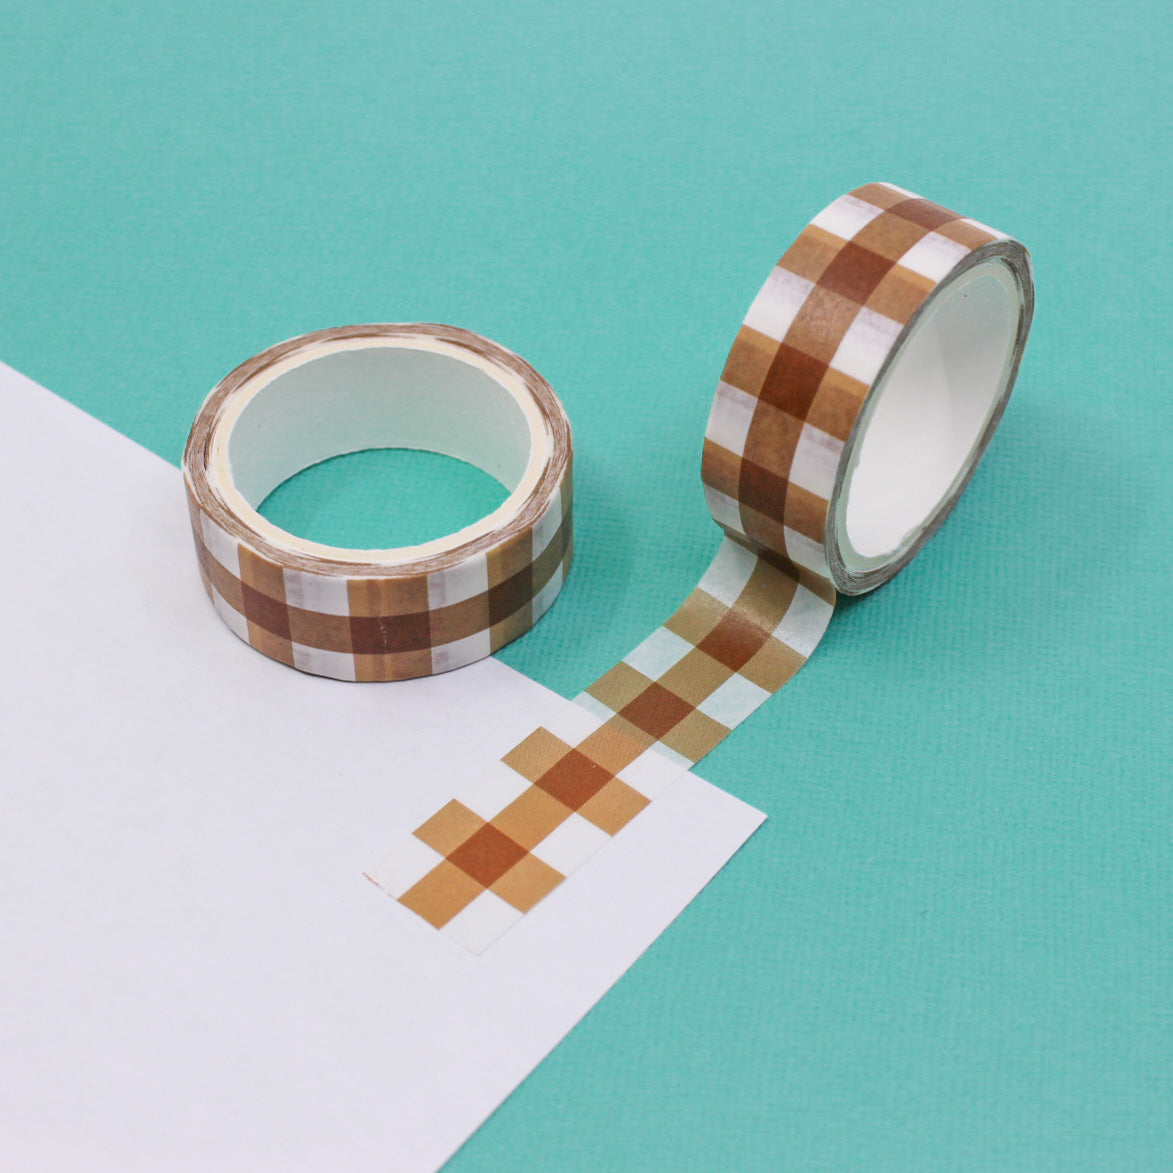 Add a rustic touch to your projects with this brown plaid washi tape. Perfect for scrapbooking, card making, or decorating journals and planners. This washi tape is sold at BBB Supplies Craft Shop.